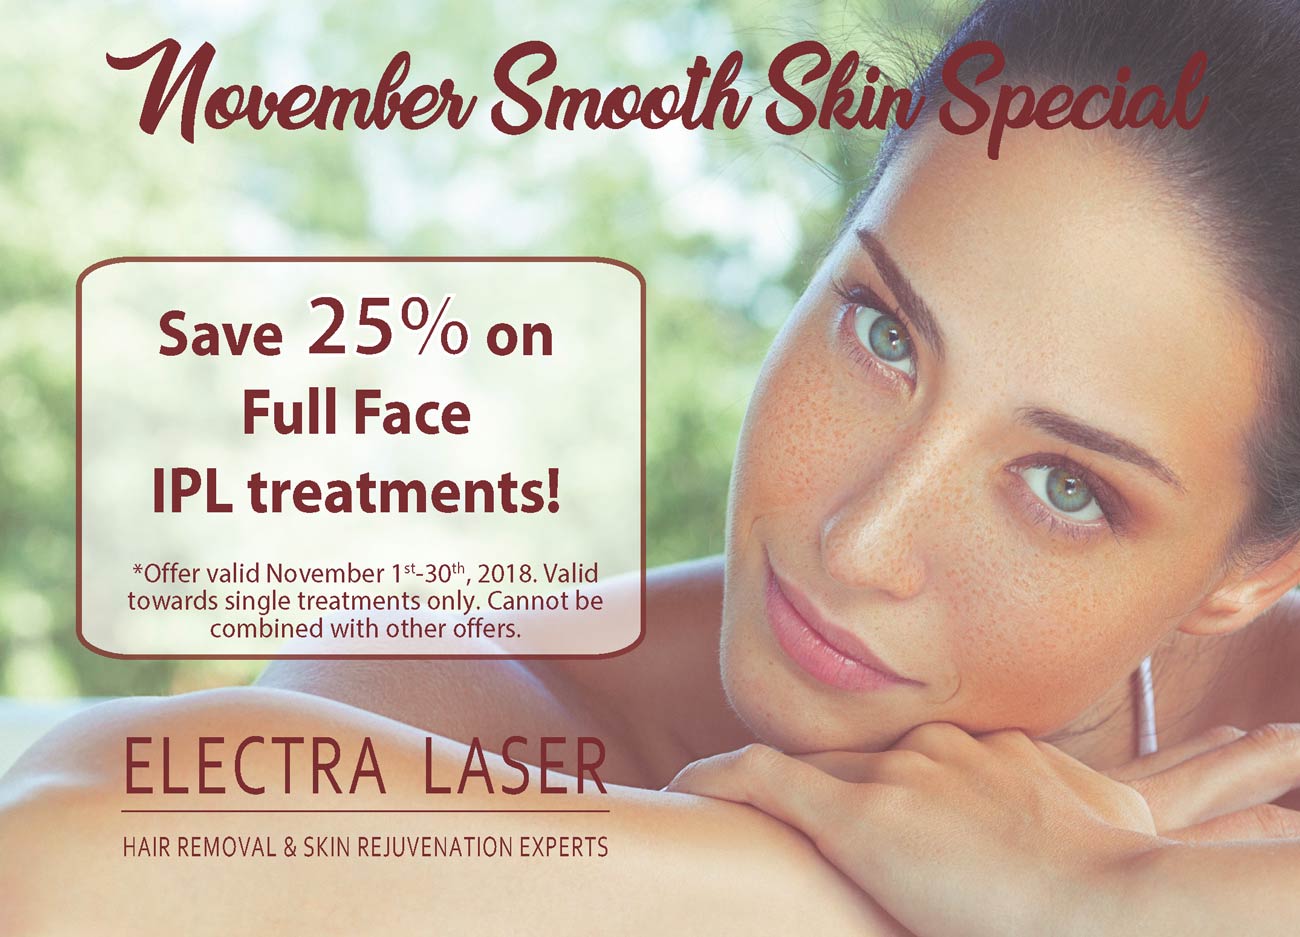 Check out our November skin special.